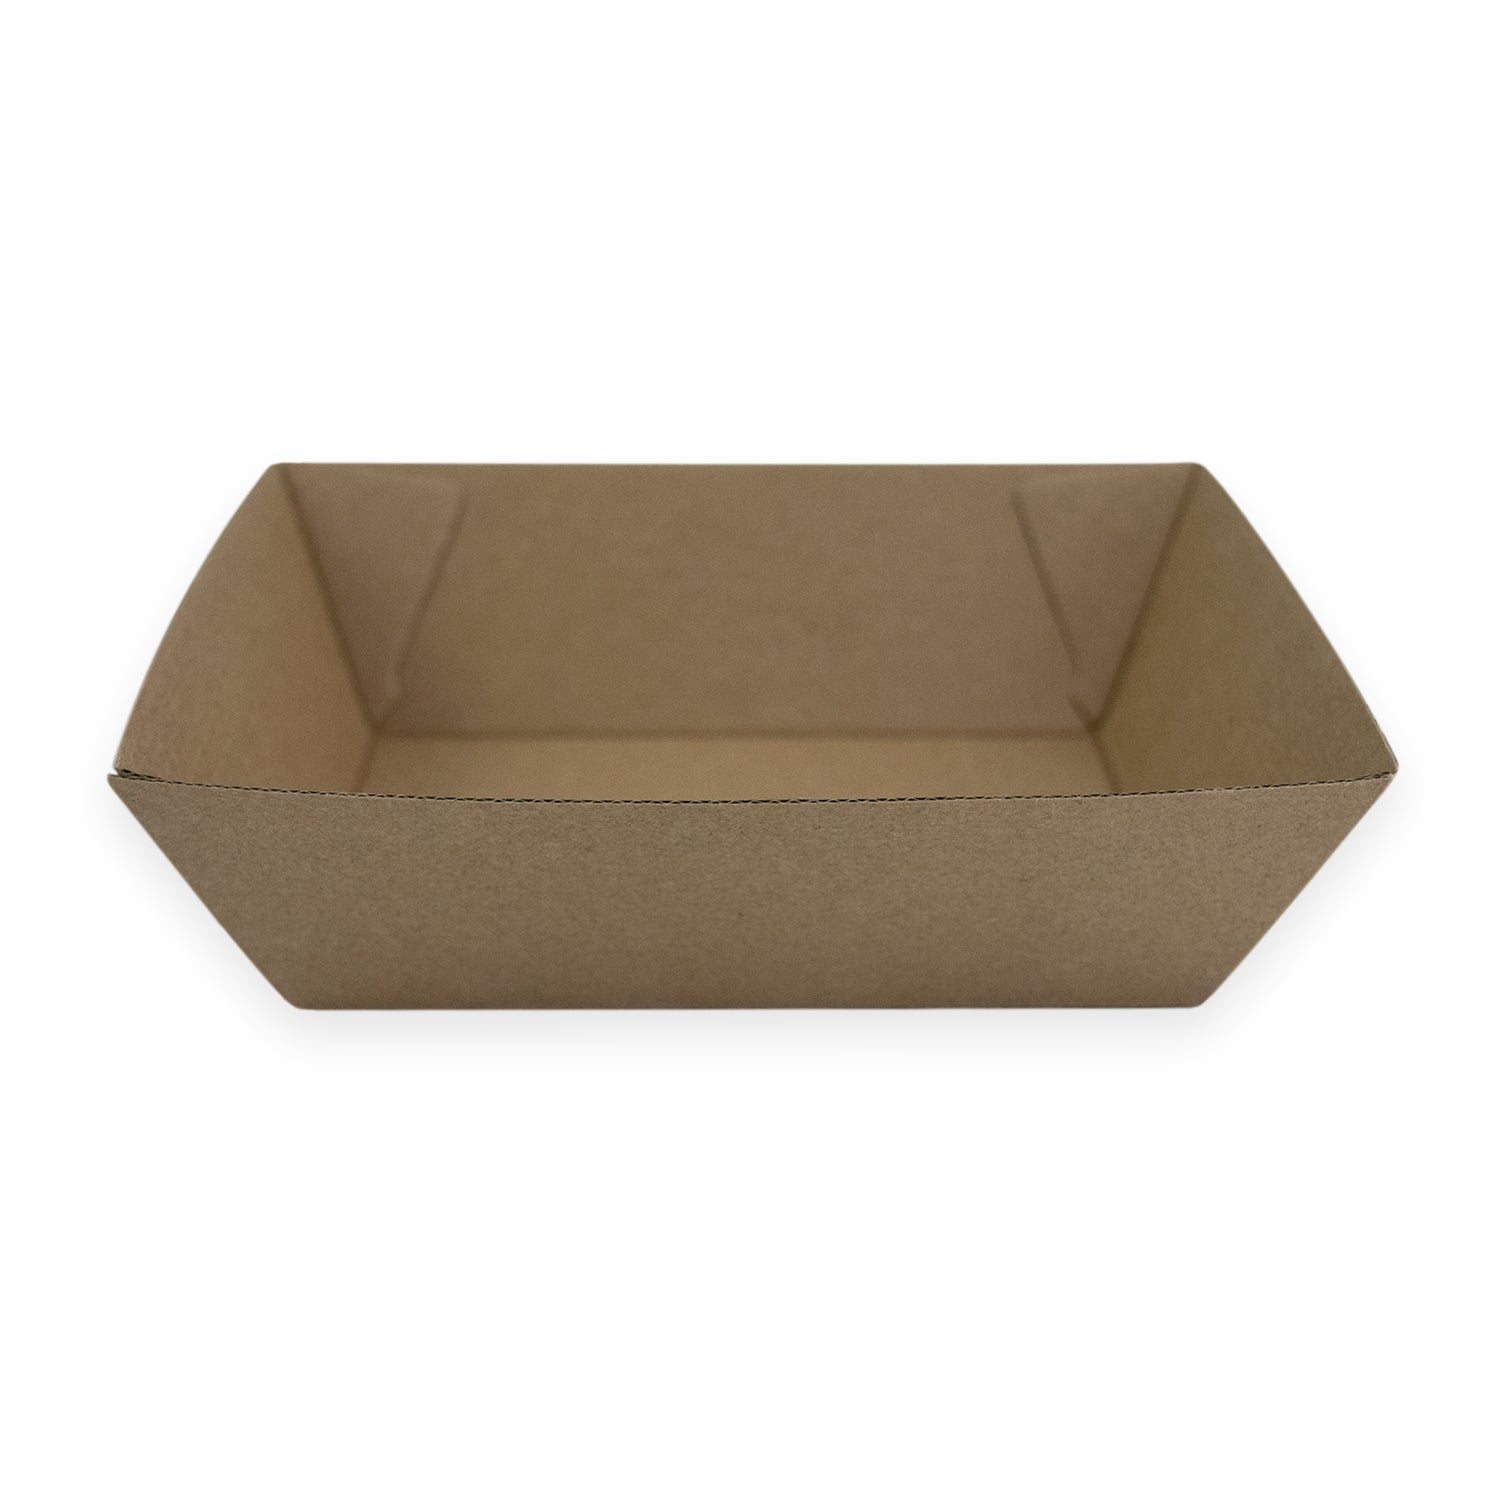 Sustain Sustain Food Tray #1 Brown - CT/500 Disposable Food Packaging Carton of 500 